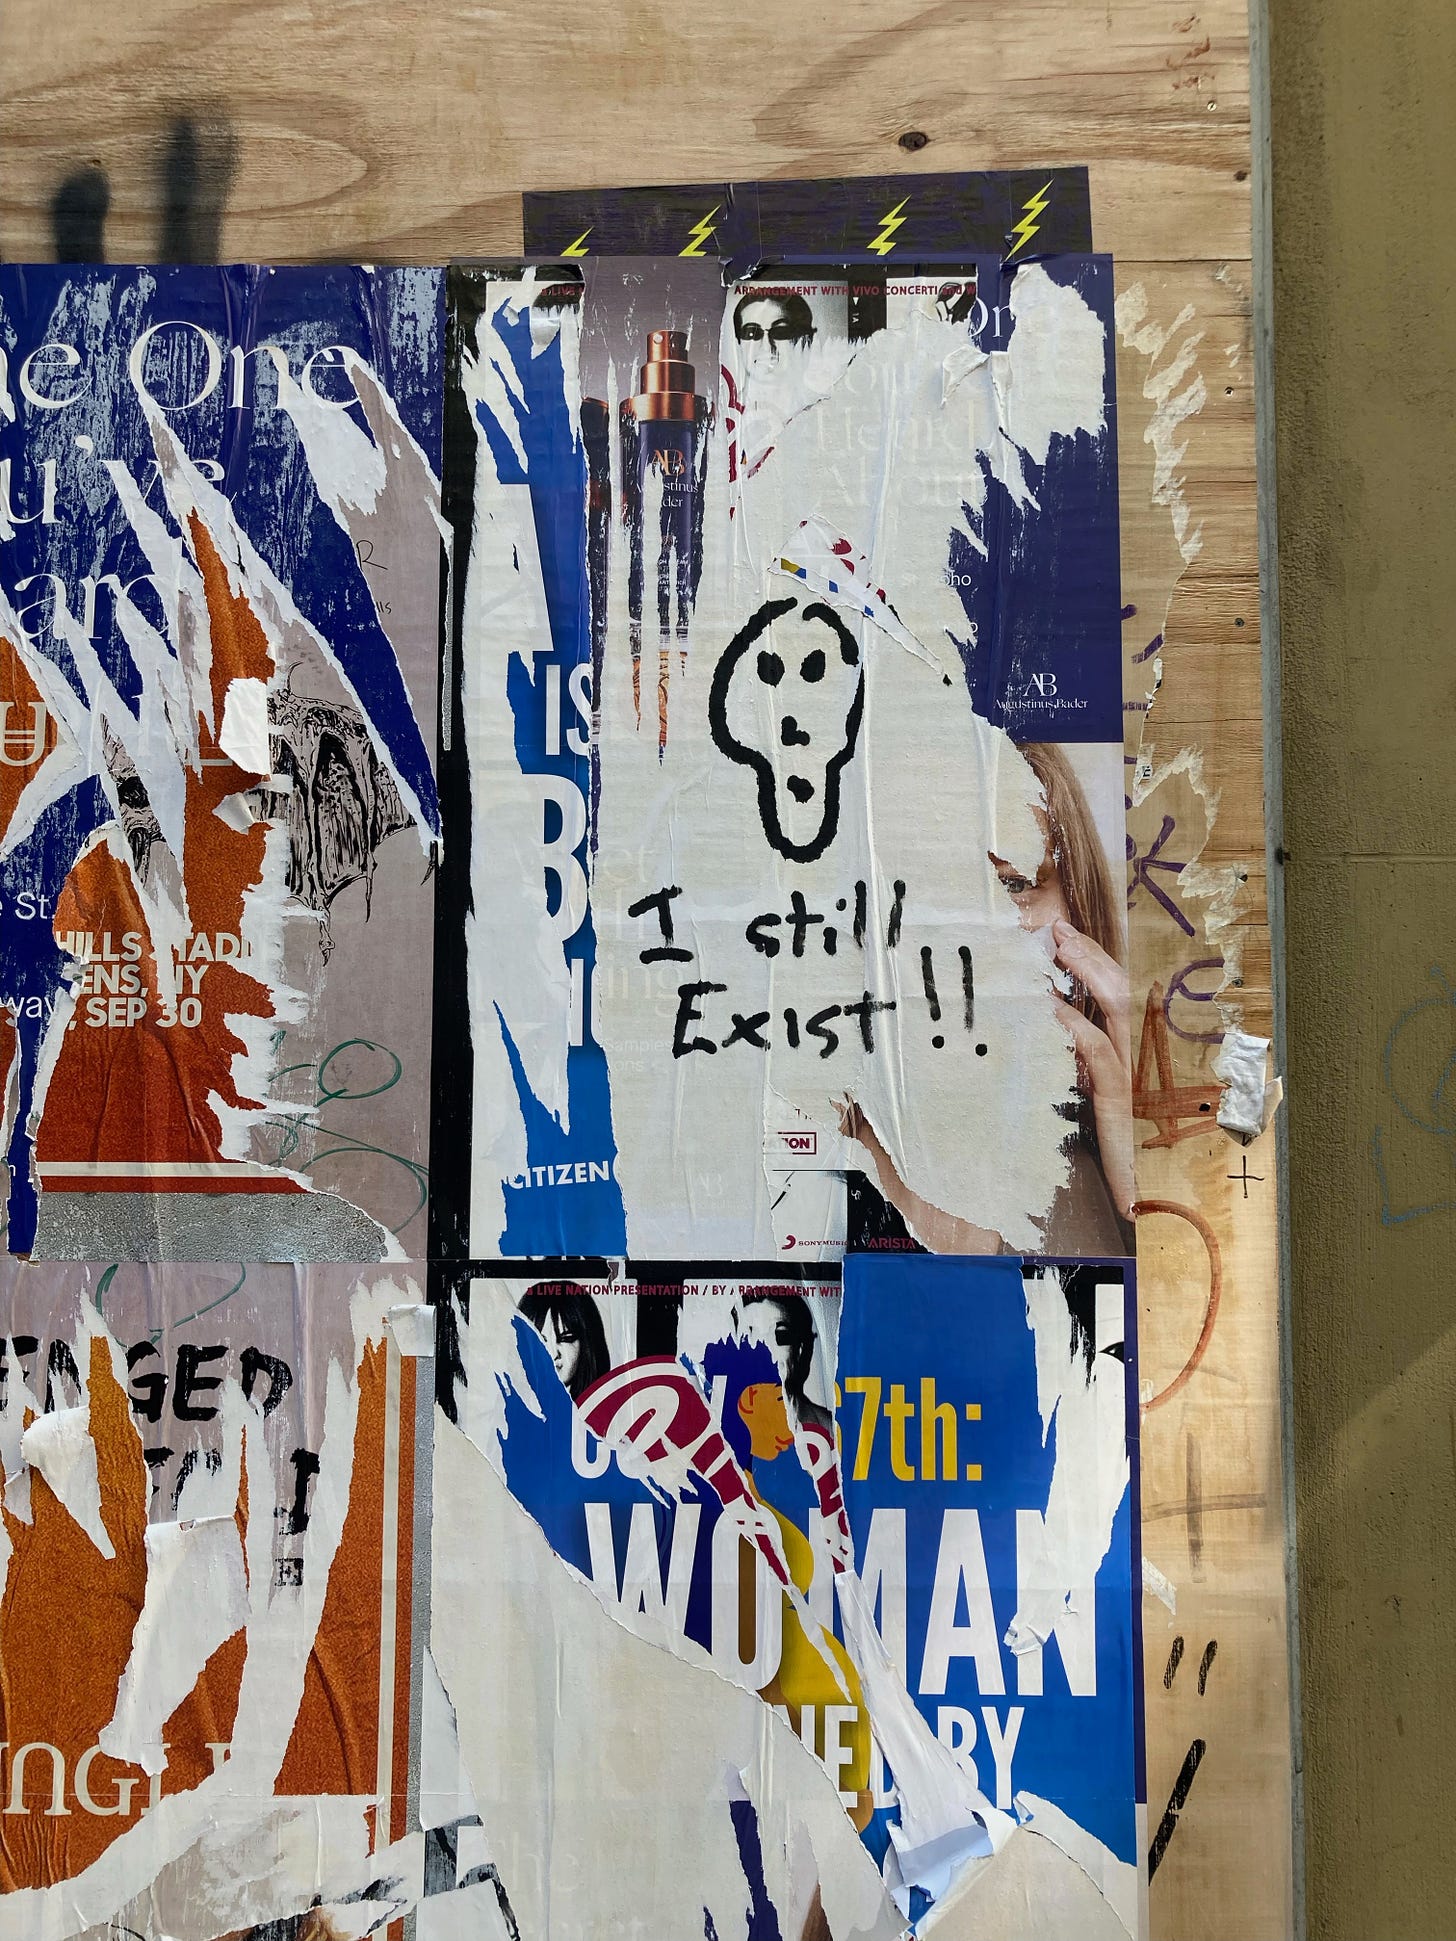 a wall of torn posters, one has a face and the words "I still Exist!!” graffitied on it